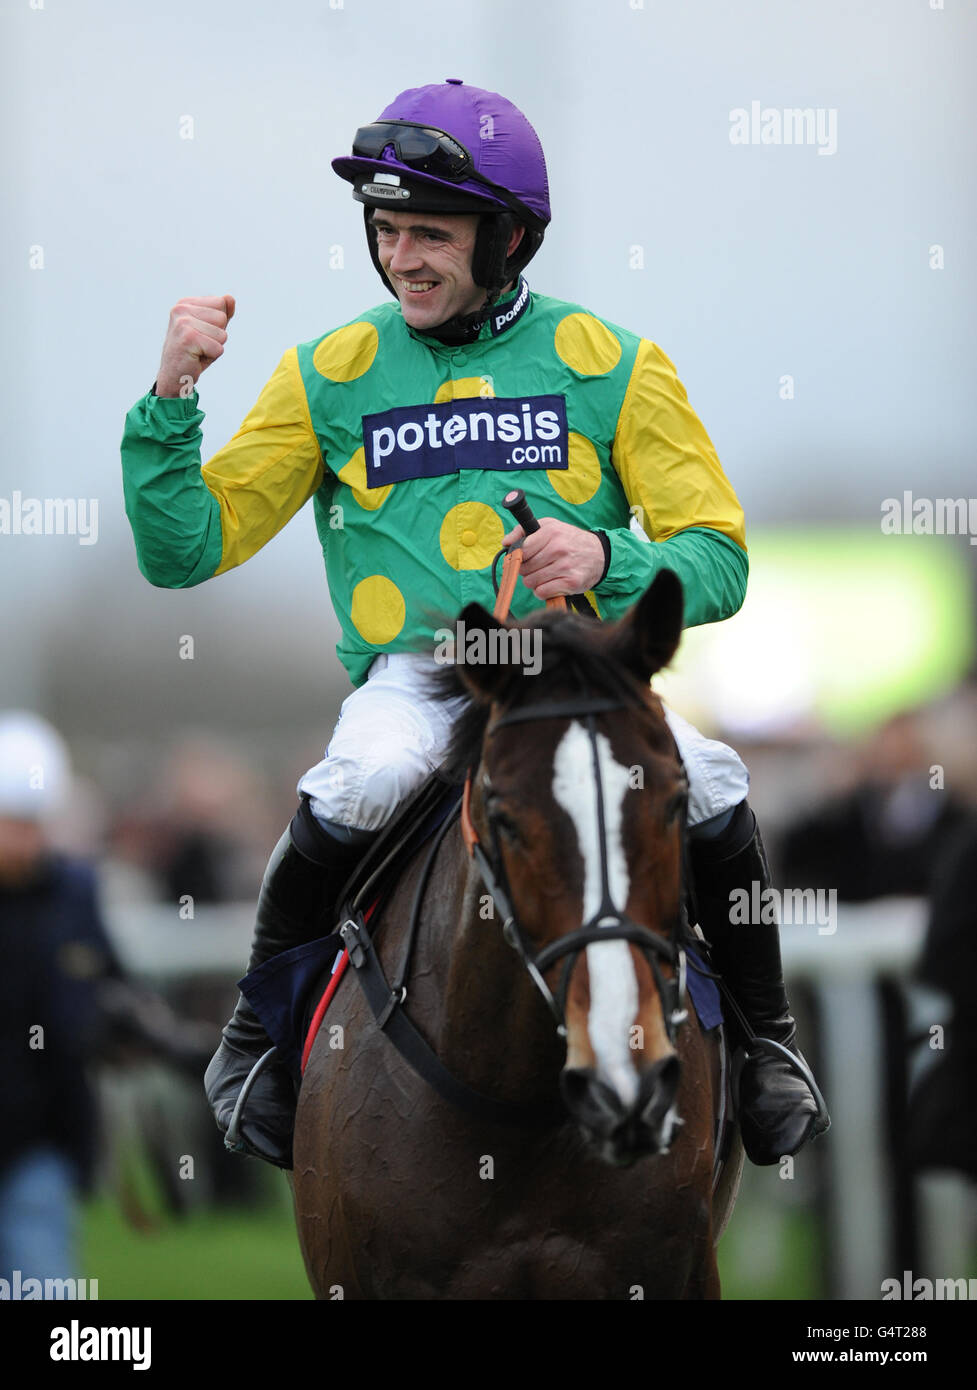 Horse Racing - The William Hill Winter Festival 2011 - King George VI Steeple Chase - Kempton Park. Kauto Star, with jockey Ruby Walsh celebrate after winning The William Hill King George VI Steeple Chase at Kempton Park. Stock Photo